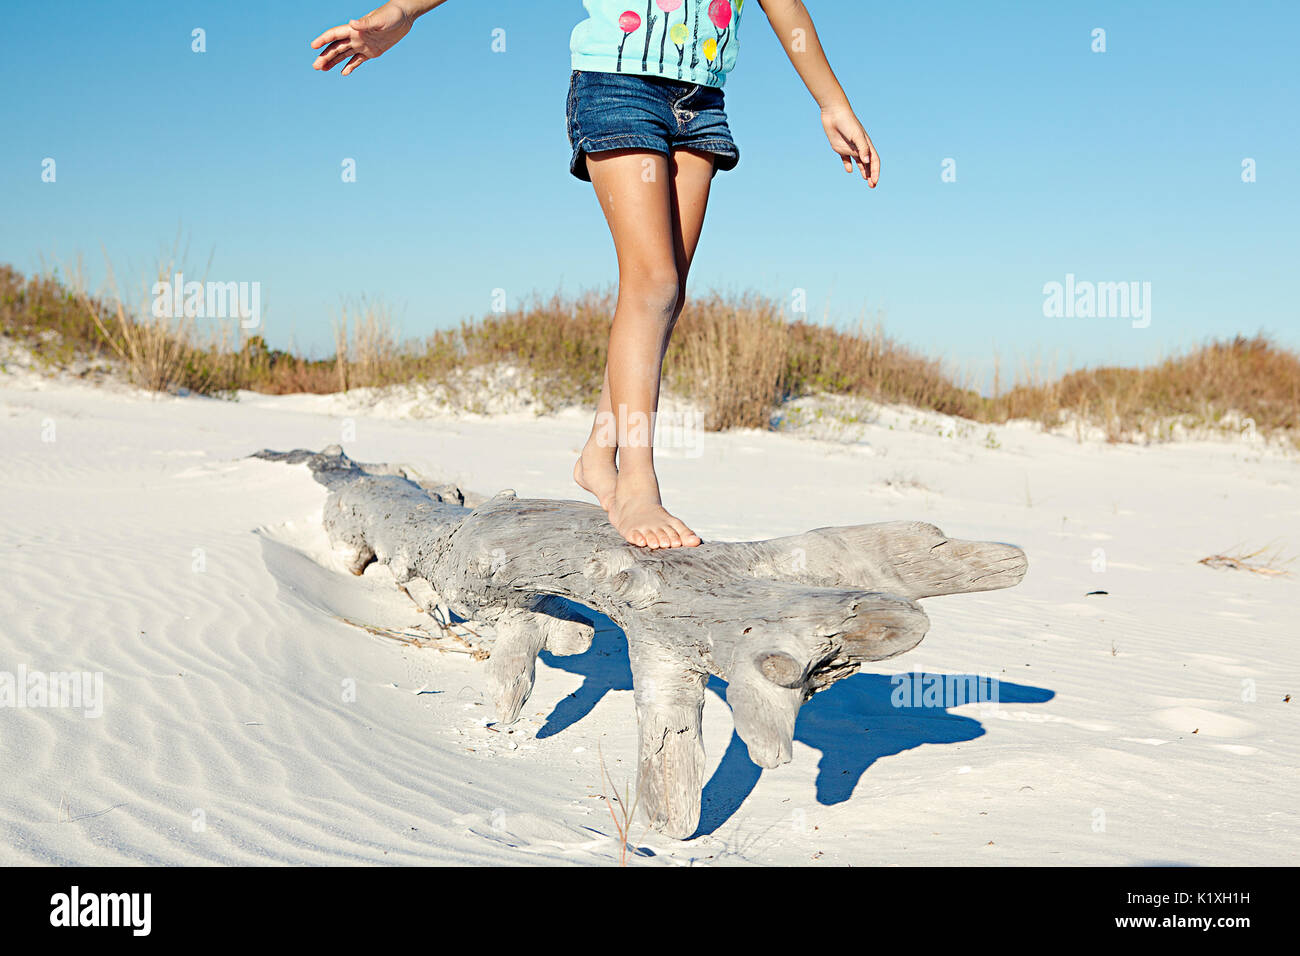 Young girl balancing on drift wood at the beach. Stock Photo